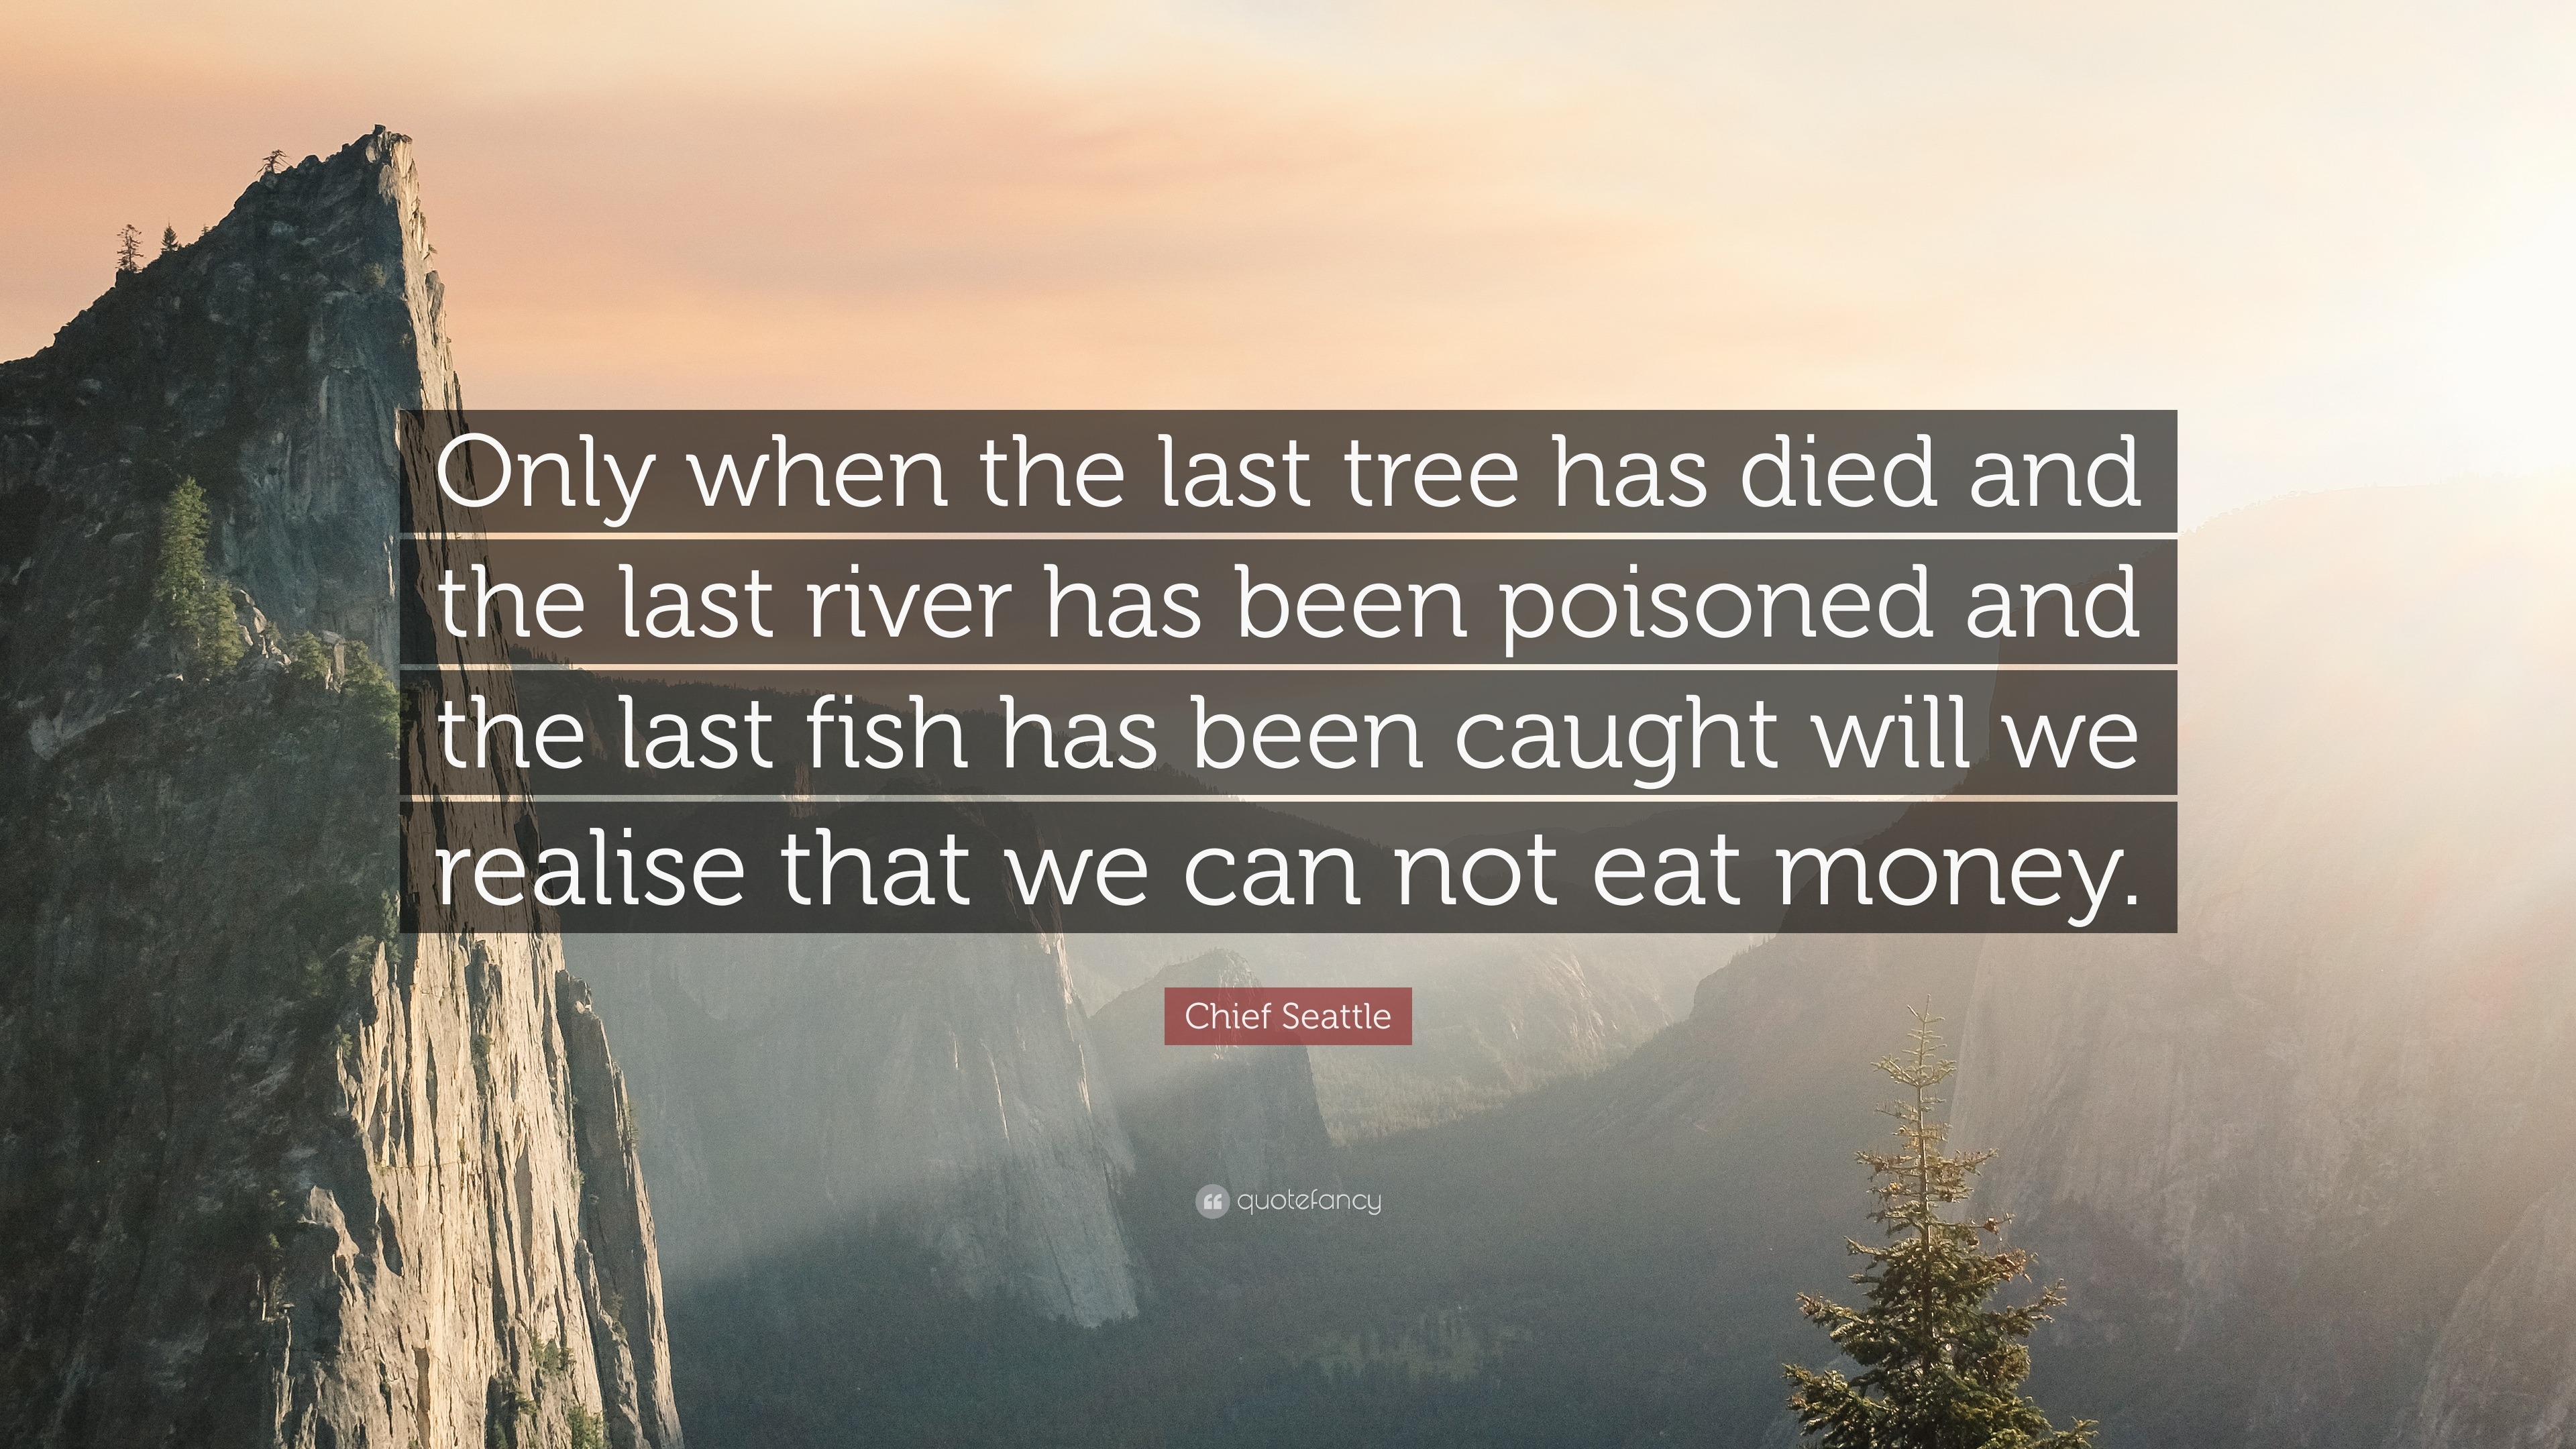 Chief Seattle Quote: “Only when the last tree has died and the last